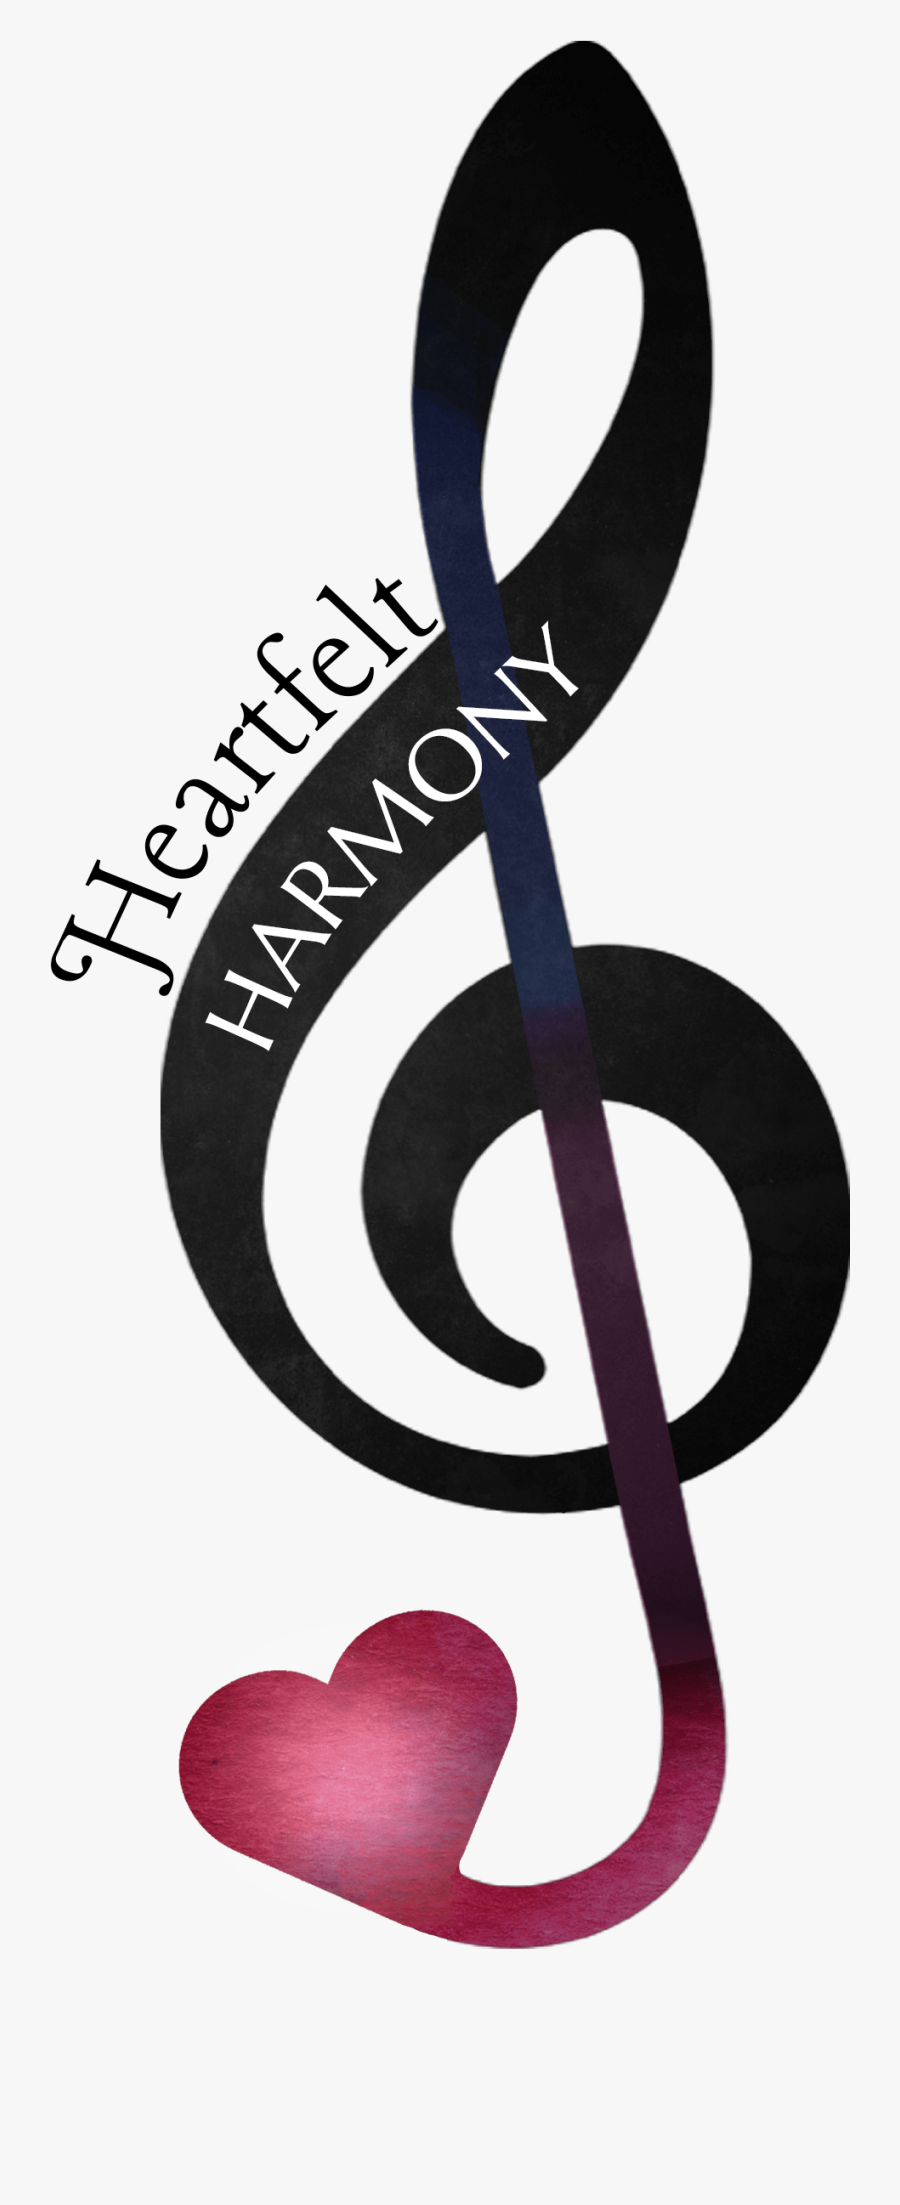 Heartfelt Harmony Music Therapy Services - Calligraphy, Transparent Clipart